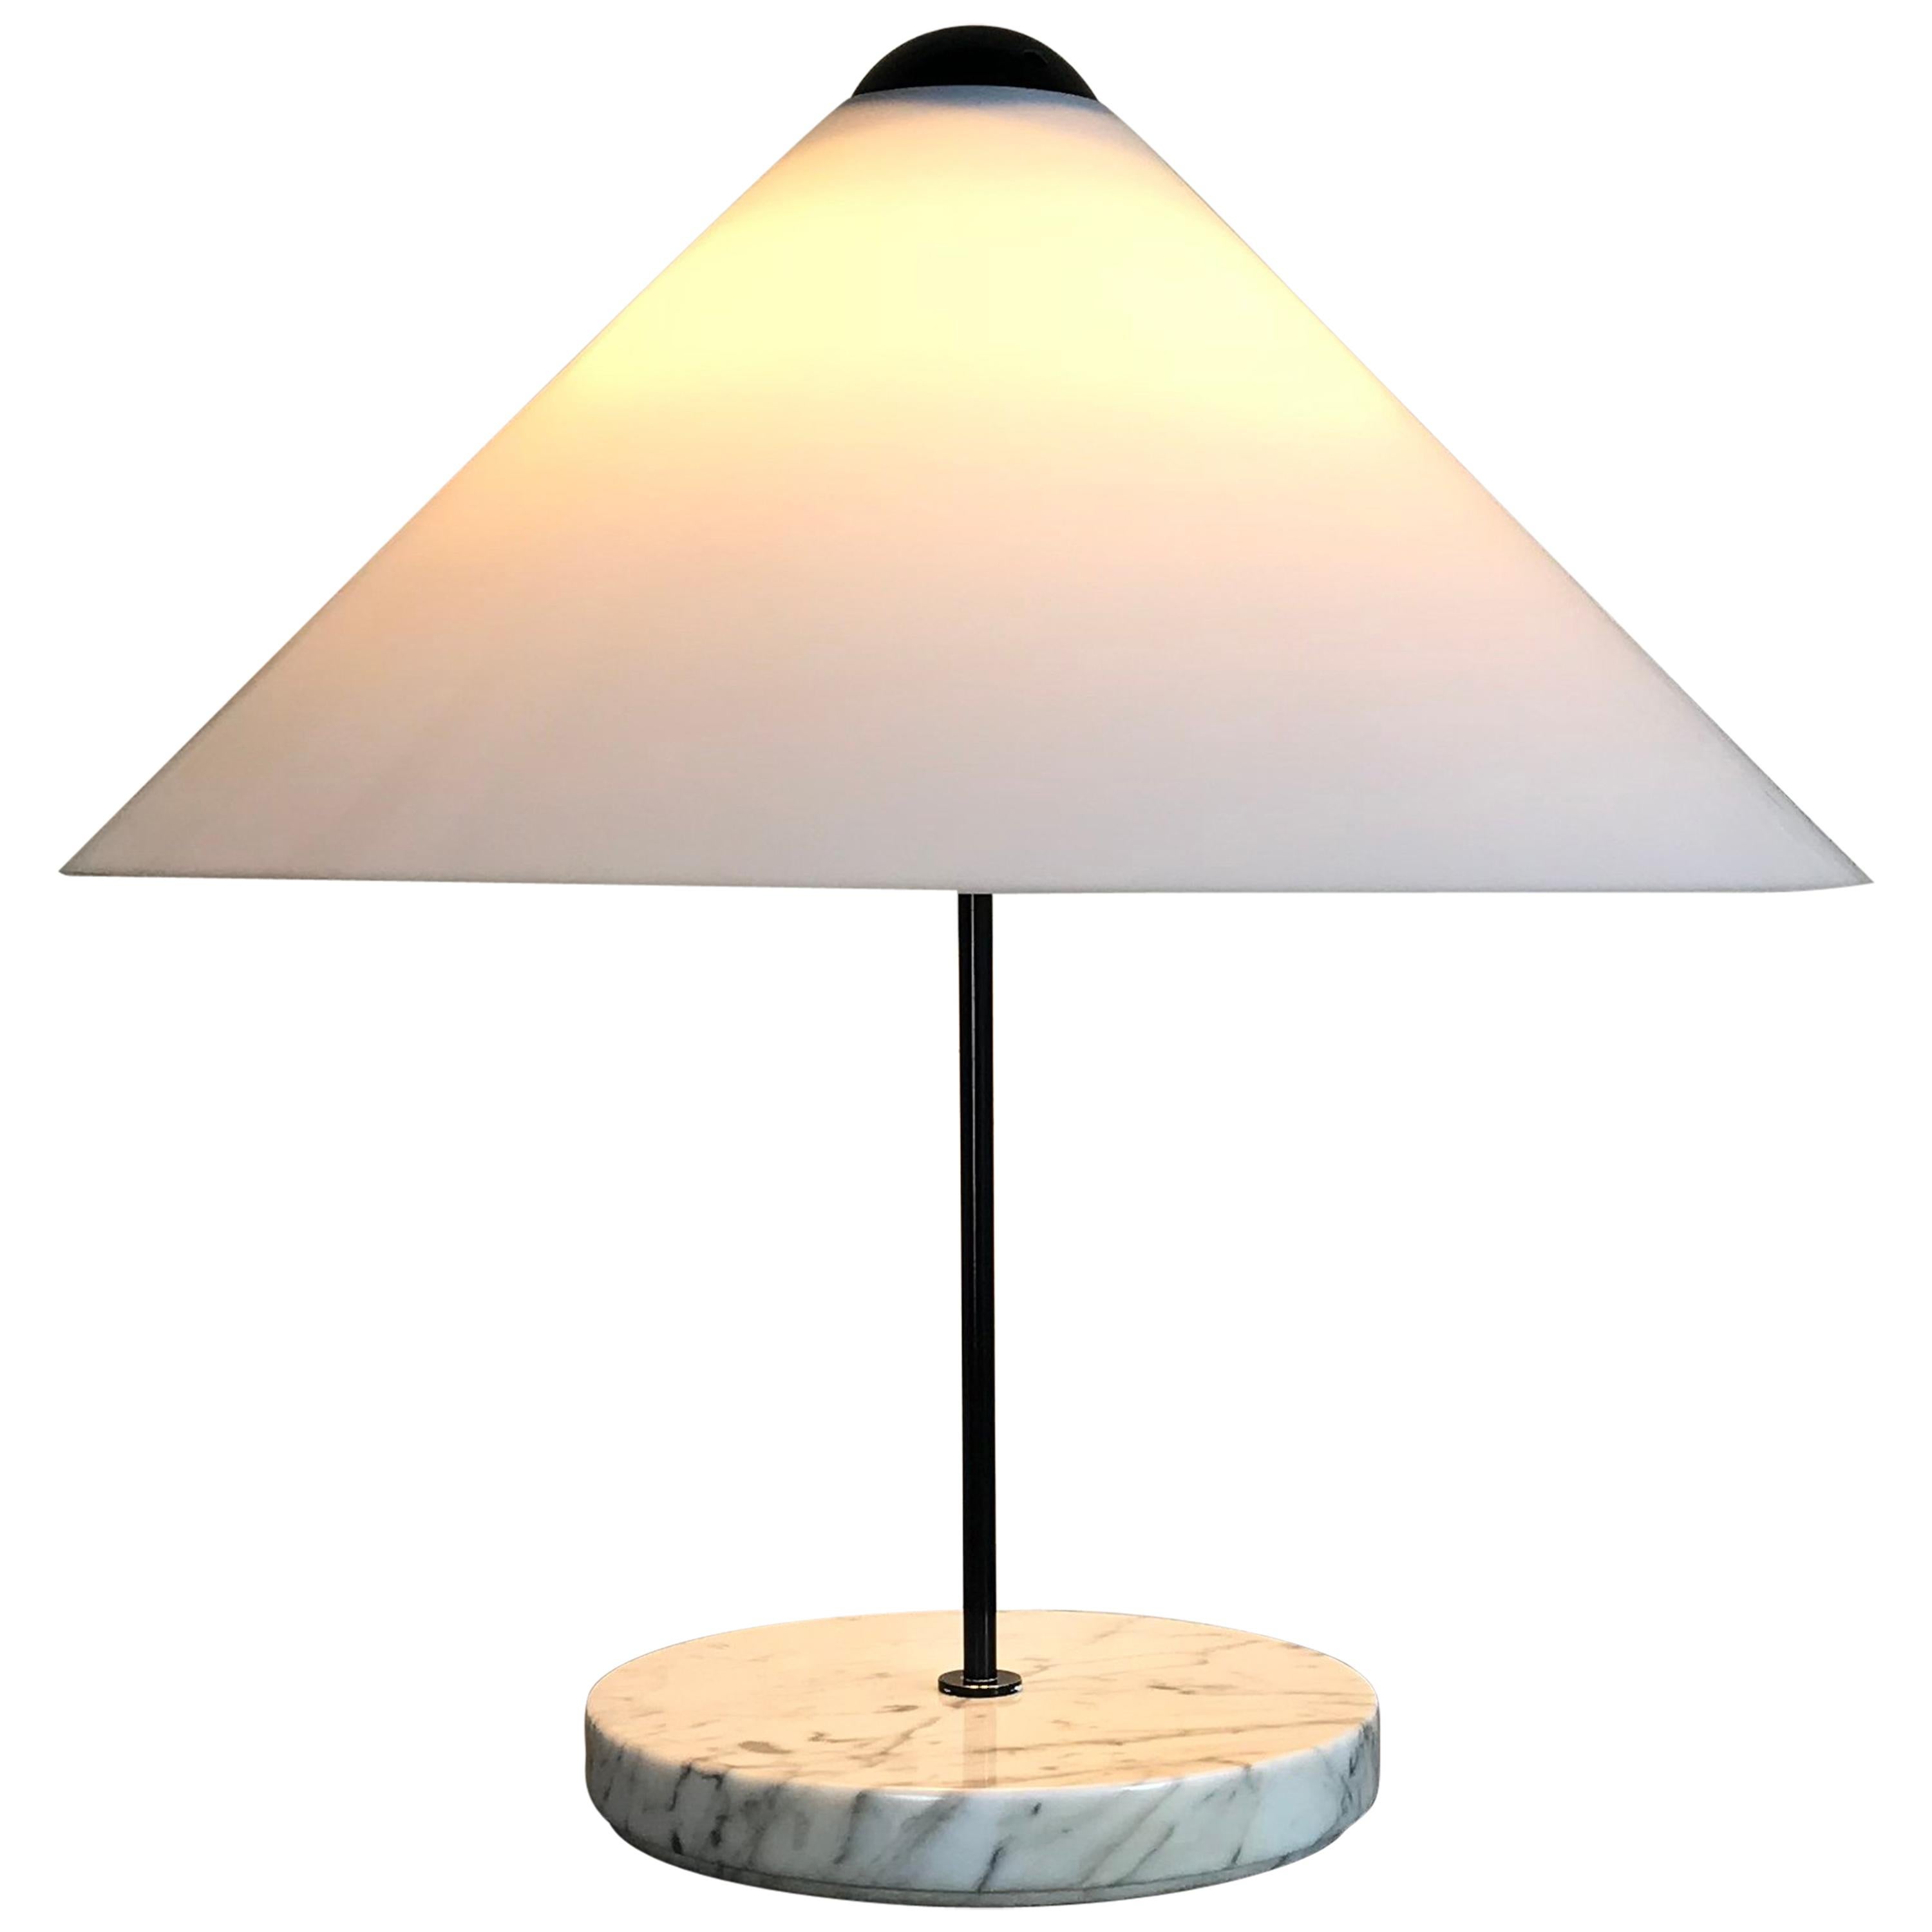 Rare Vintage ‘Snow’ Table Lamp Designed by Vico Magistretti for Oluce, 1974